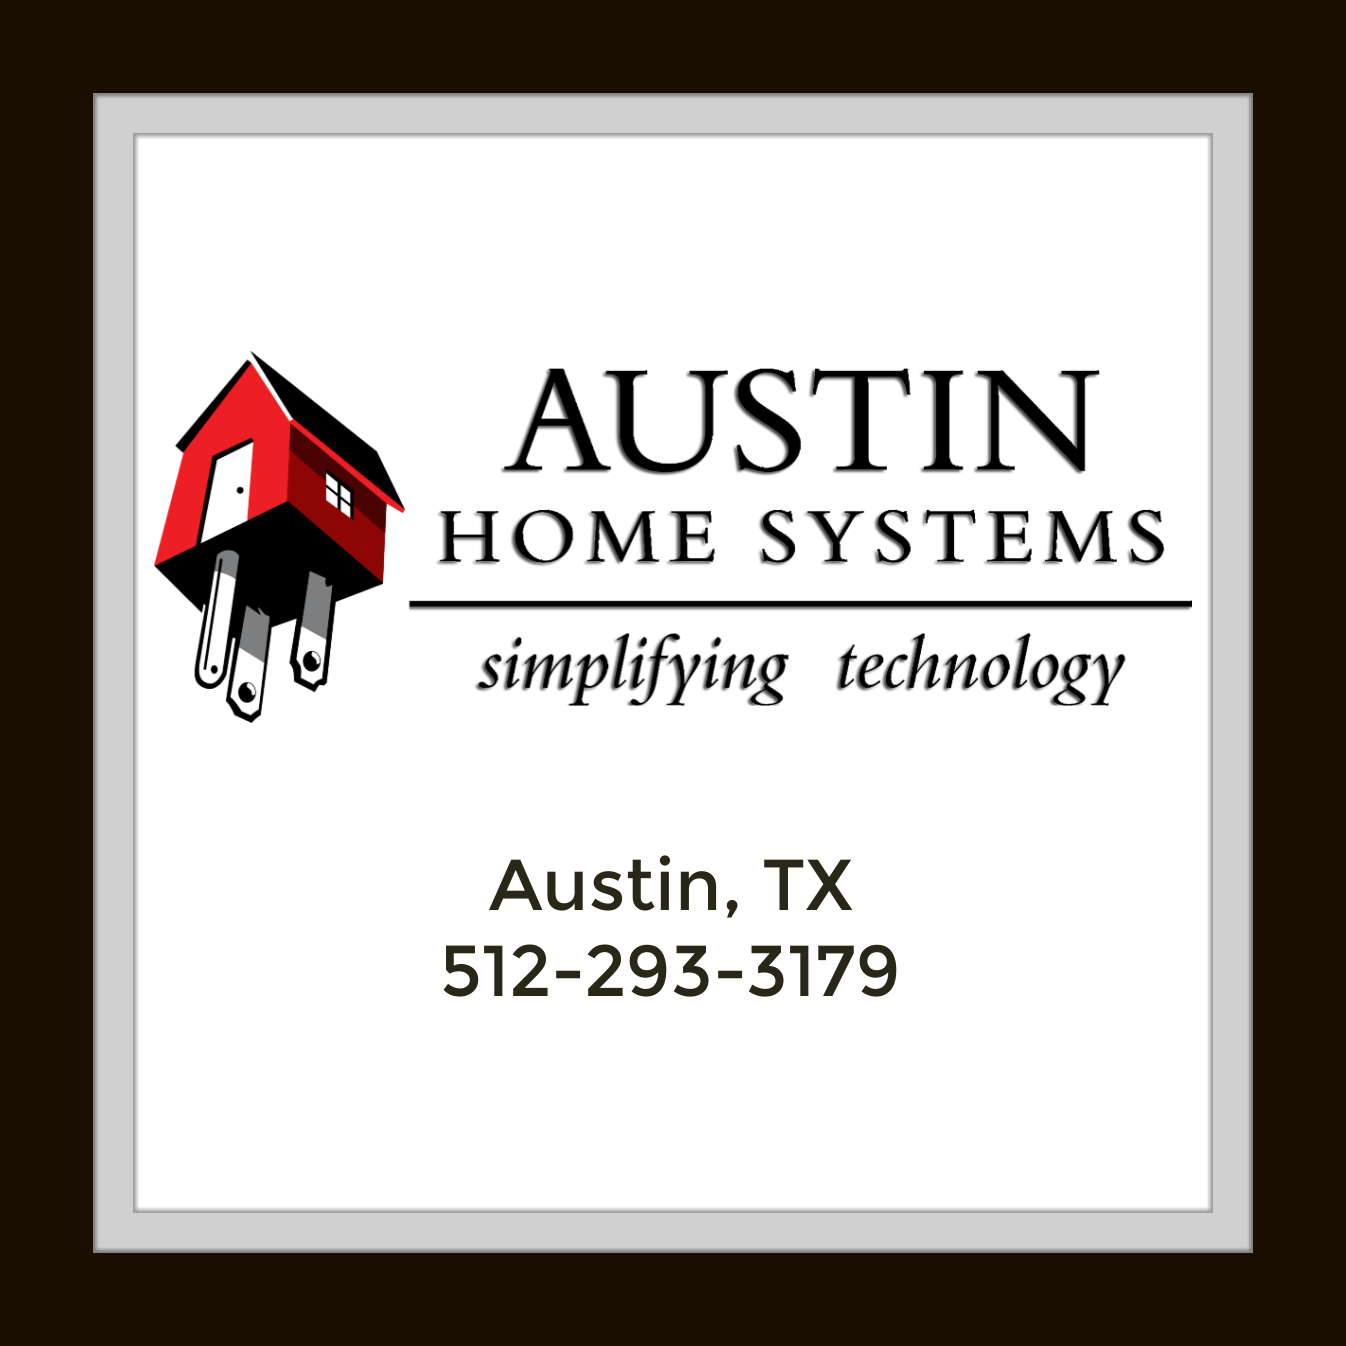 Austin Home Systems